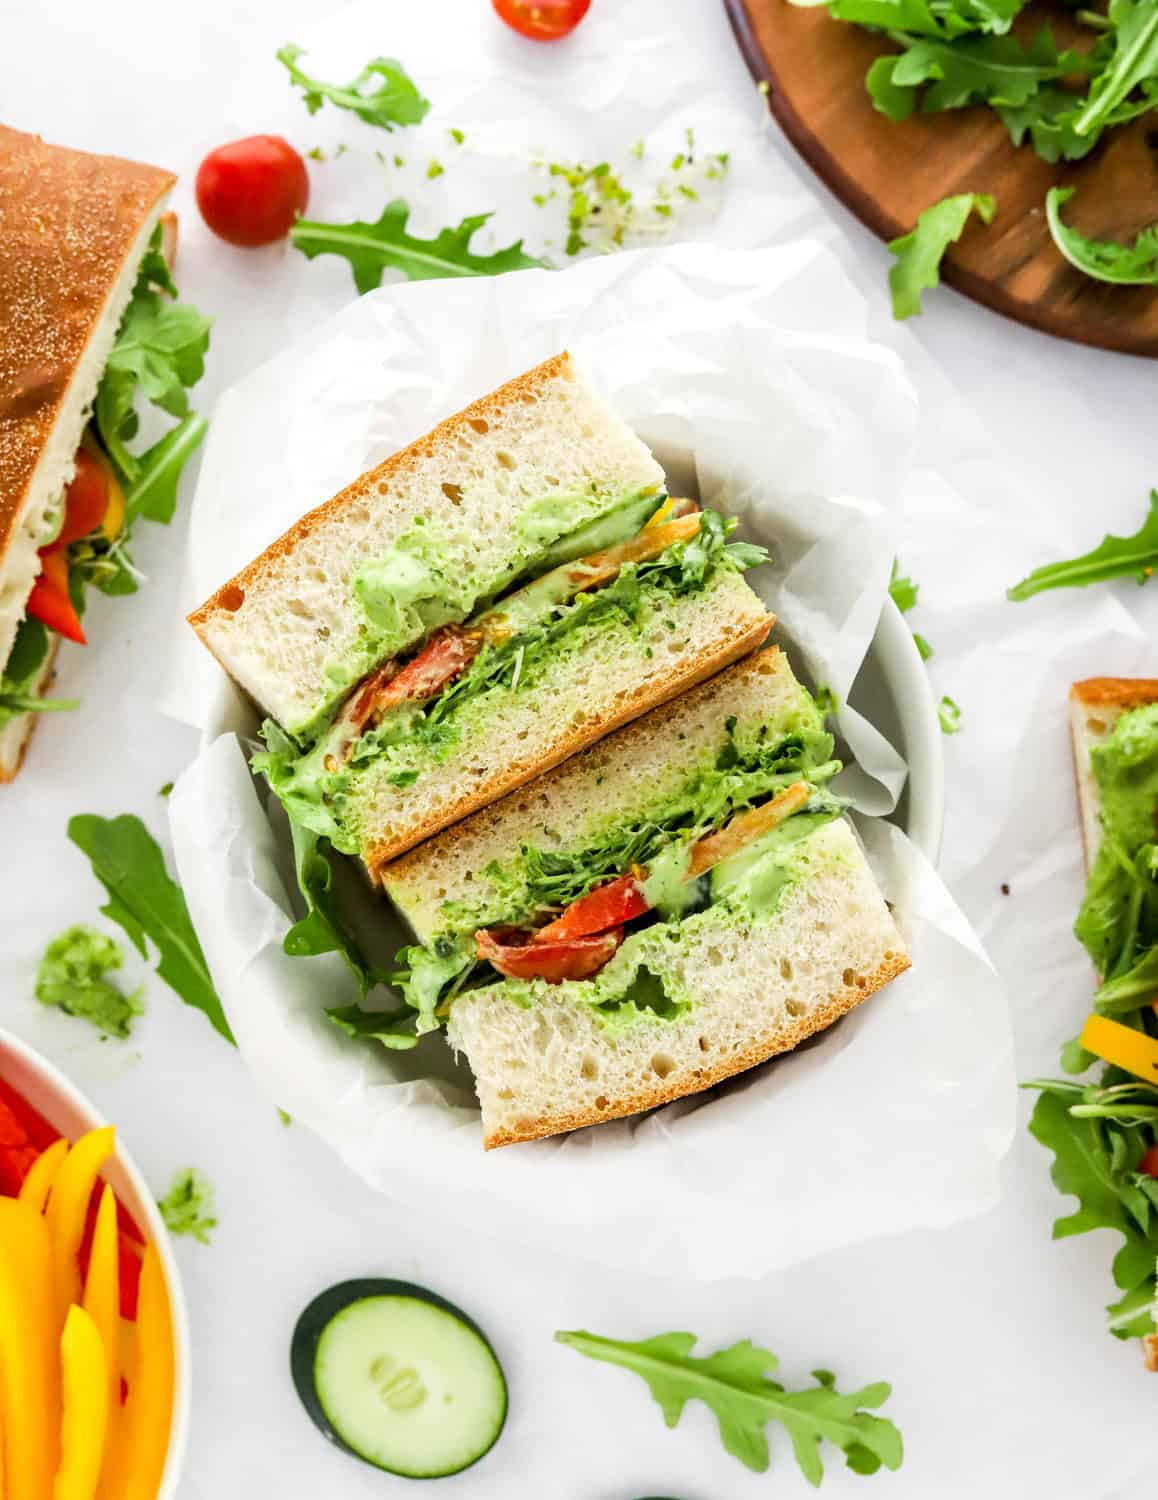 Vegan sandwich loaded with veggies and a creamy green dressing in between large sliced of bread in a bowl with more sandwiches and veggies around it. 